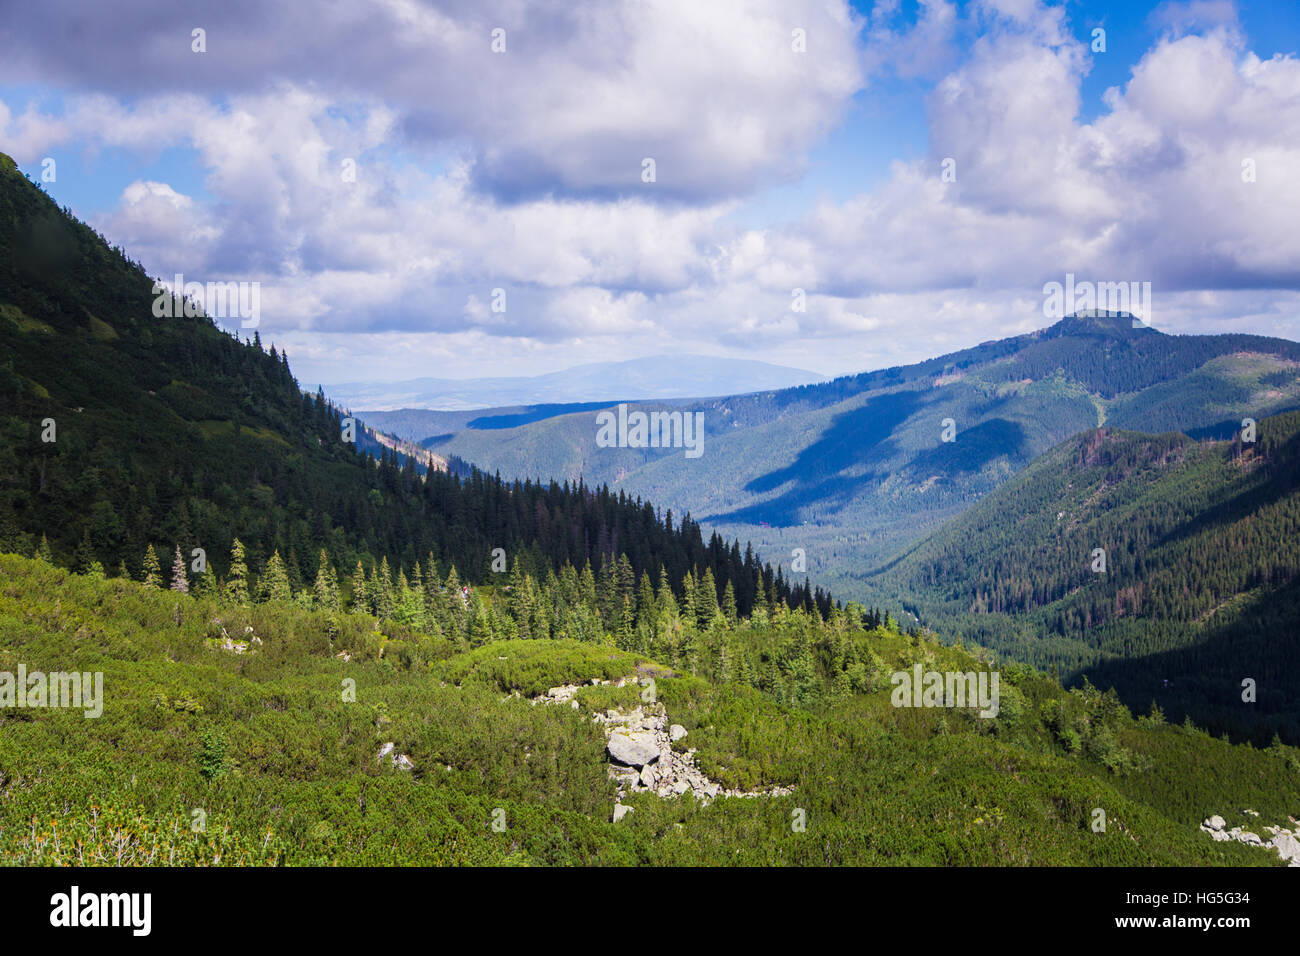 A beautiful mountain landscape with trees Stock Photo